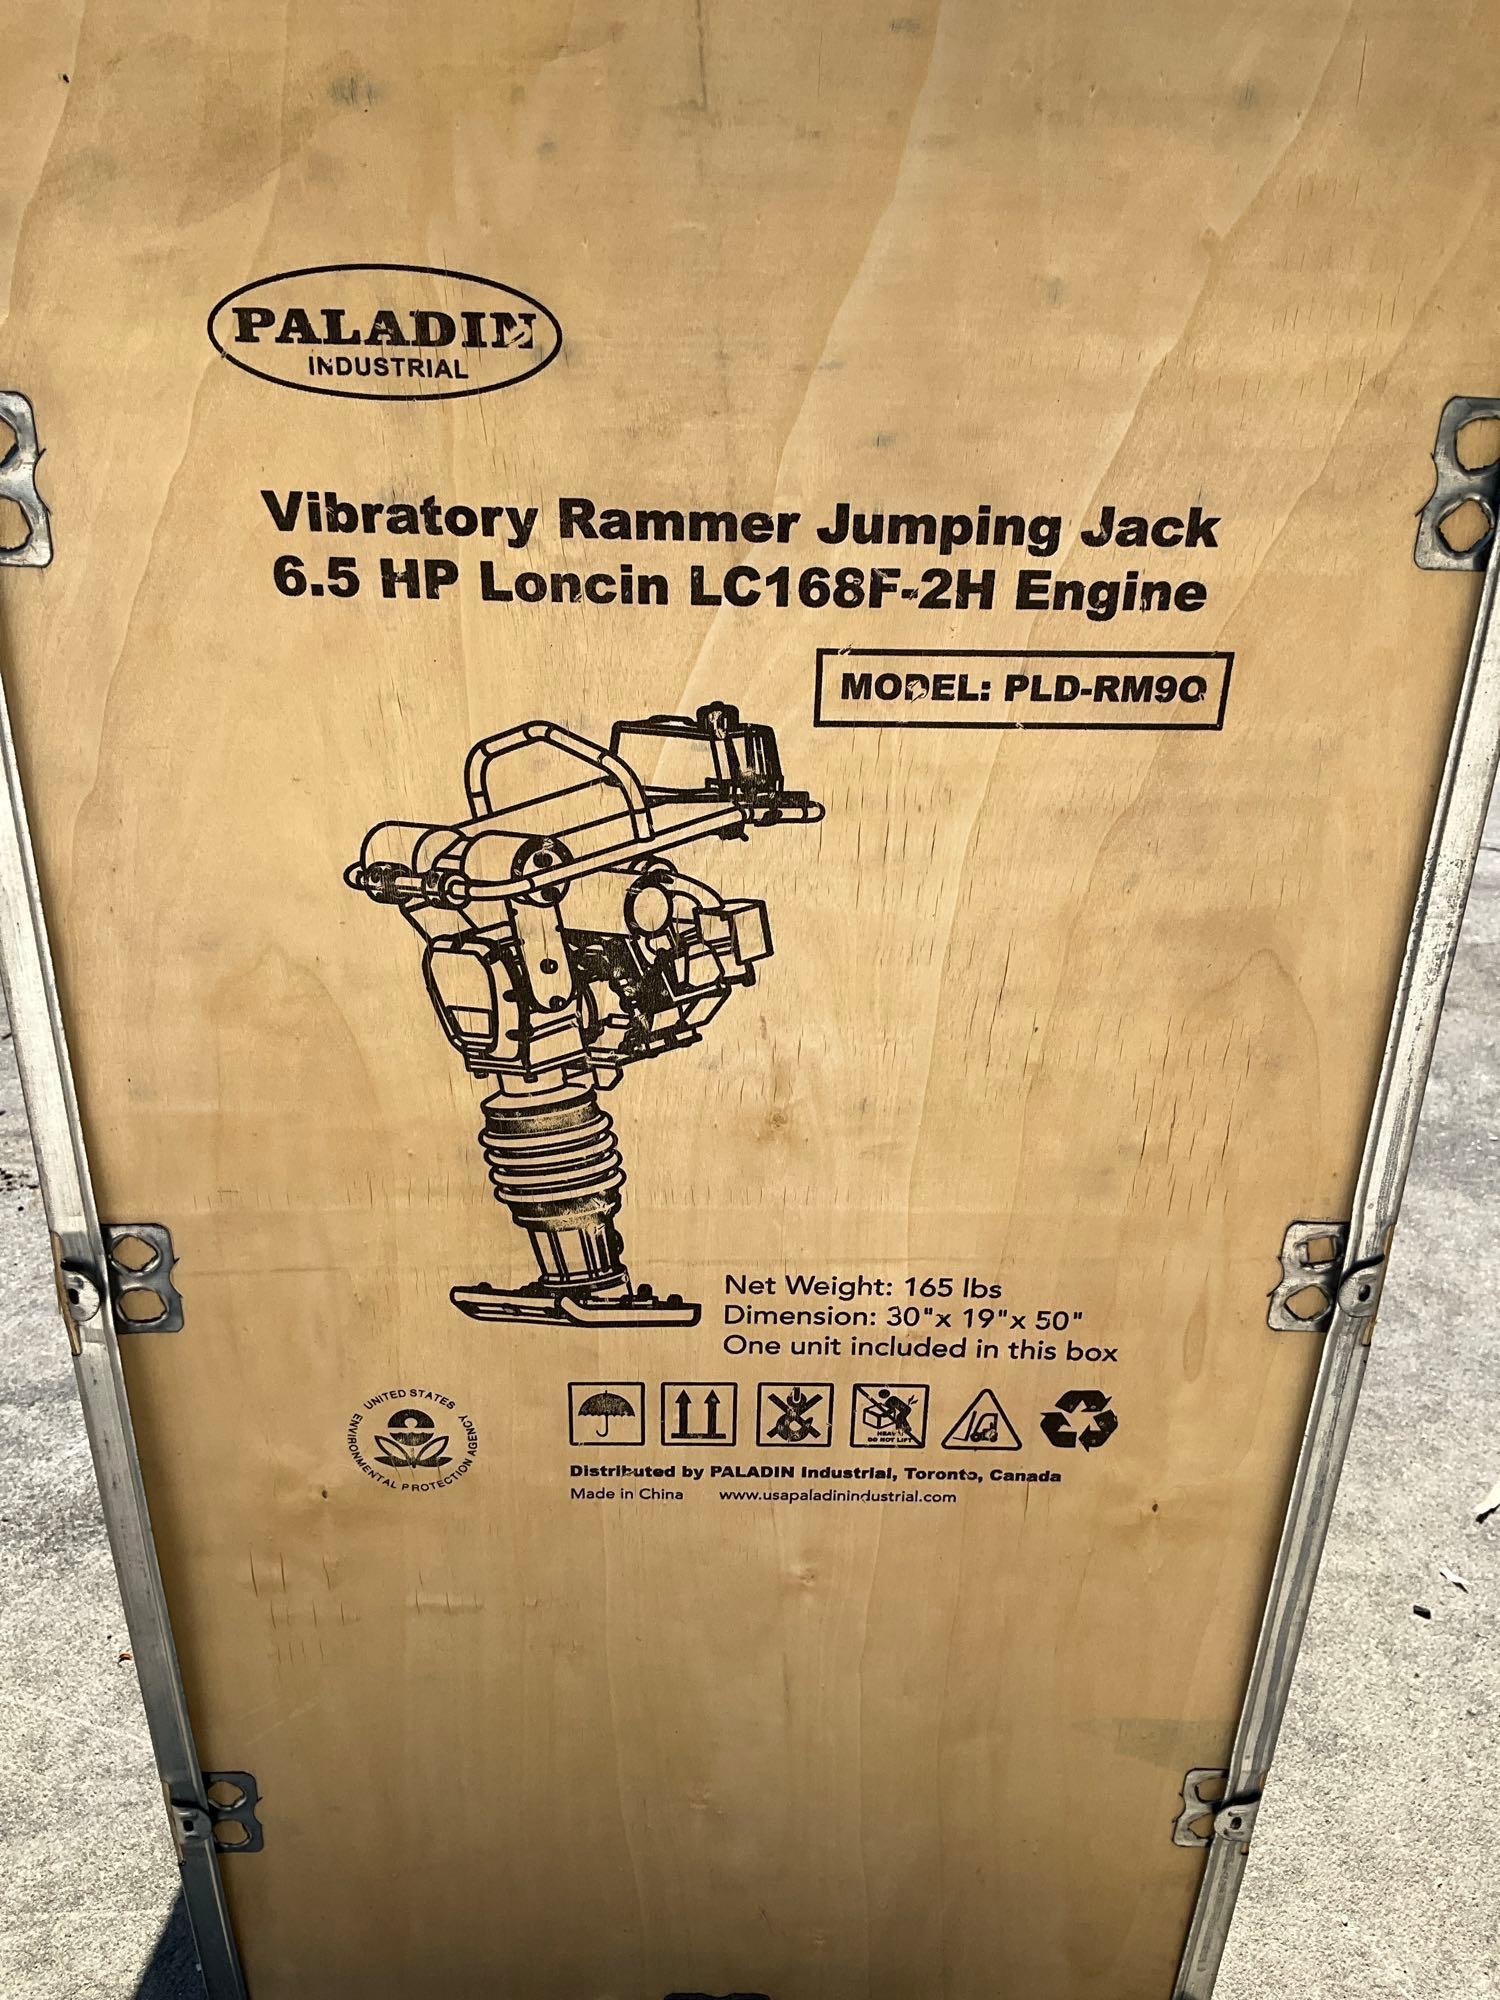 UNUSED PALADIN INDUSTRIAL RAMMER JUMPING JACK MODEL PLD-RM90, GAS POWERED